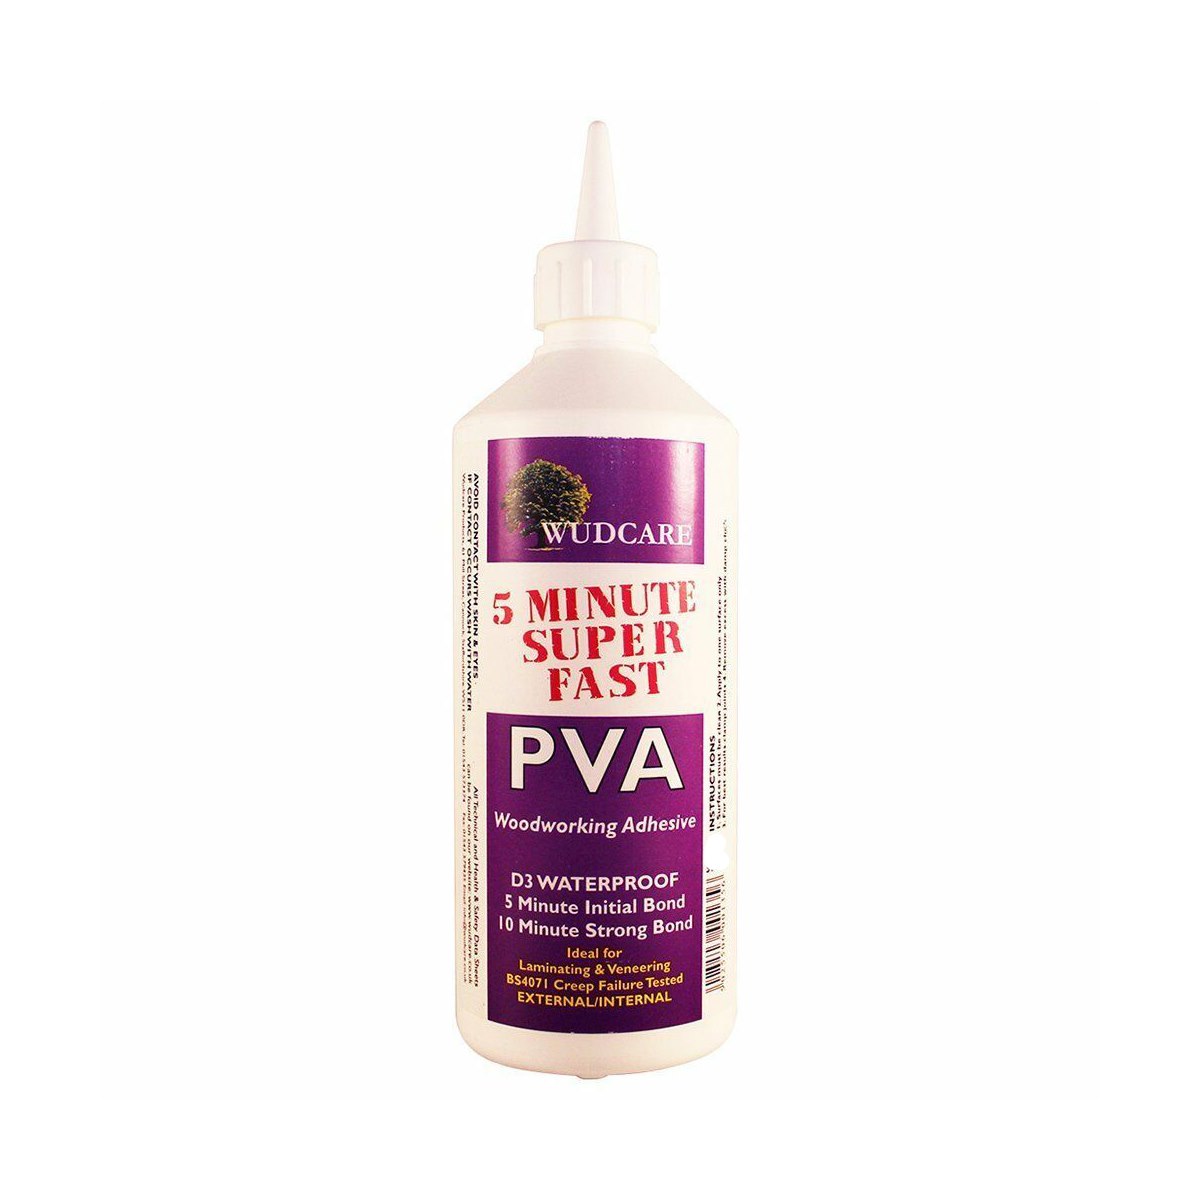 Wudcare 5 Minute Super Fast PVA Woodworking Adhesive 1 Litre